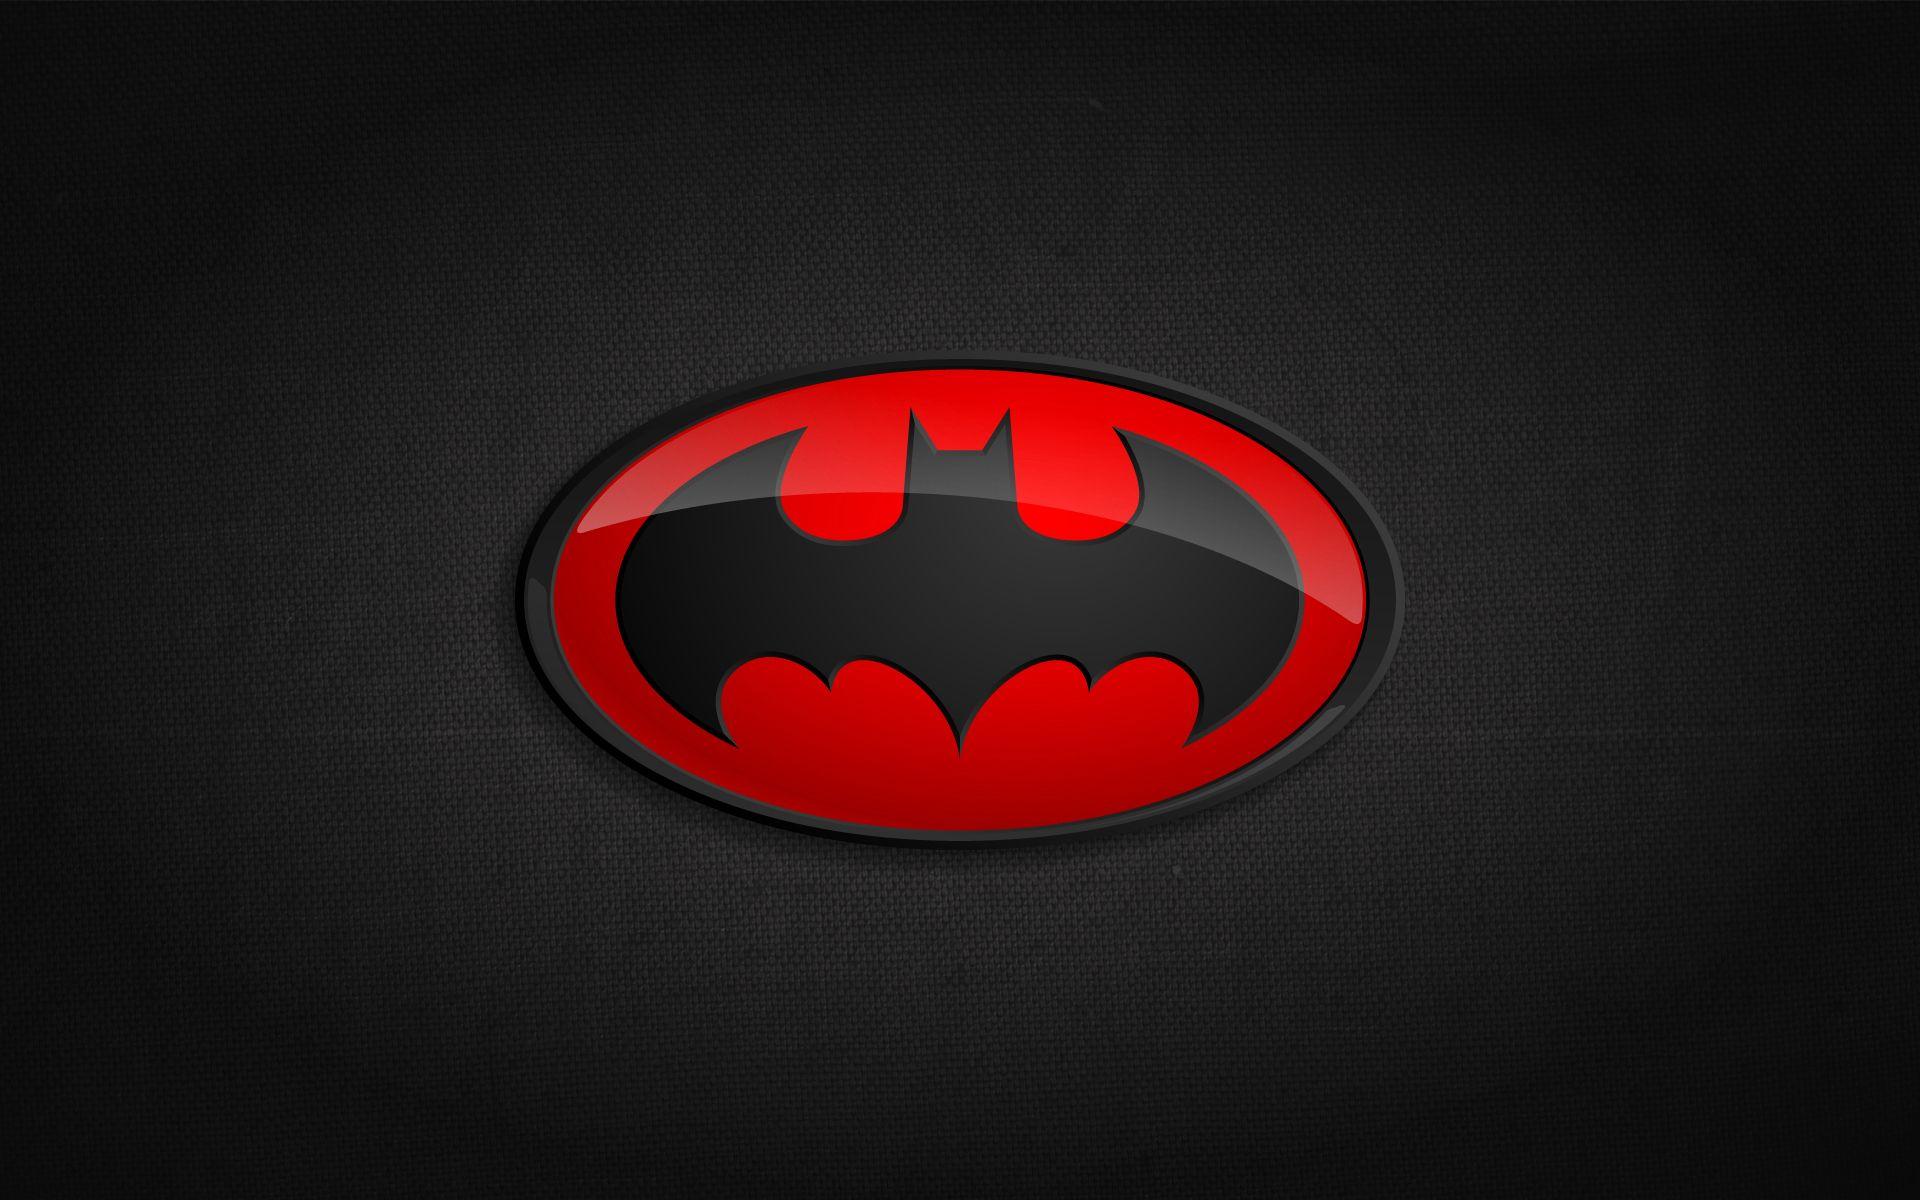 Black and Red Batman Logo - Android Wallpaper Collected From the 'Net III: Favorites for Red